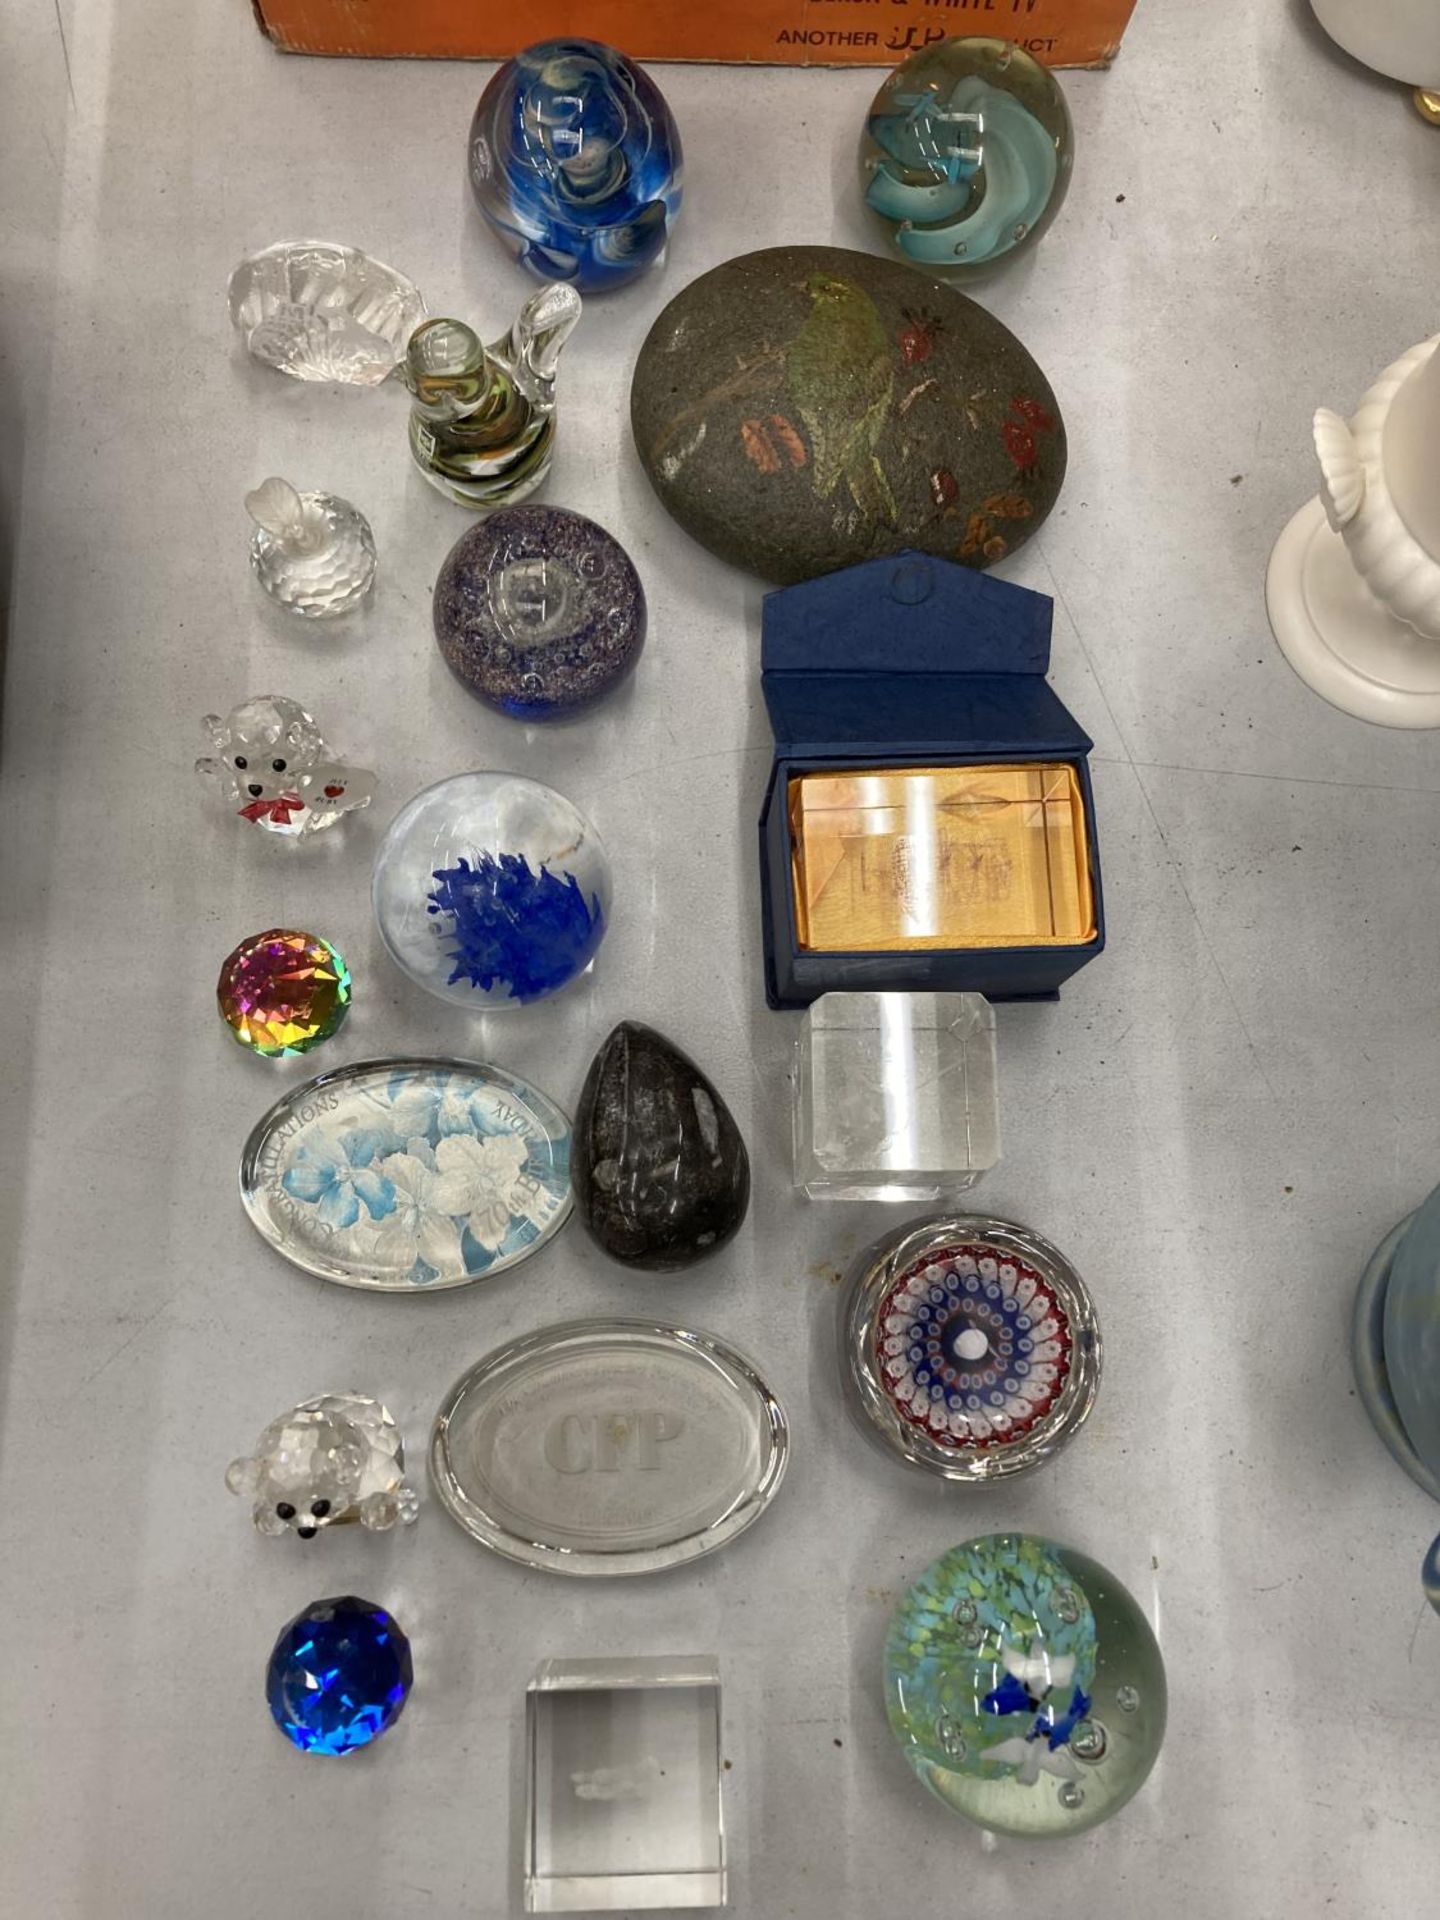 A LARGE COLLECTION OF GLASSWARE PAPERWEIGHTS TO INCLUDE A MDINA BIRD, ETC - 20 IN TOTAL